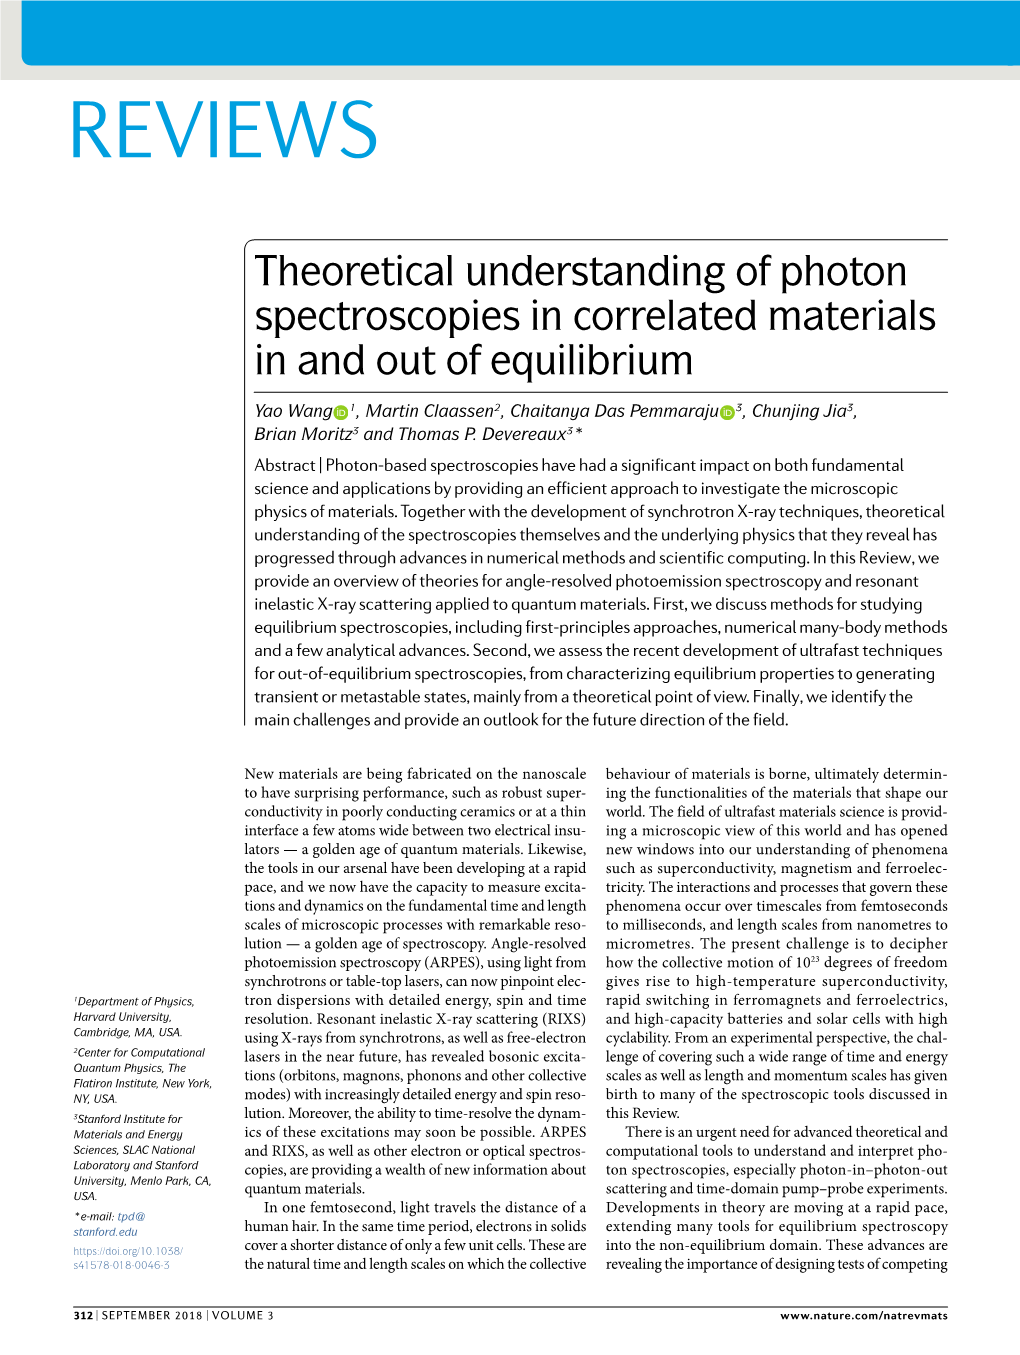 Theoretical Understanding of Photon Spectroscopies in Correlated Materials in and out of Equilibrium